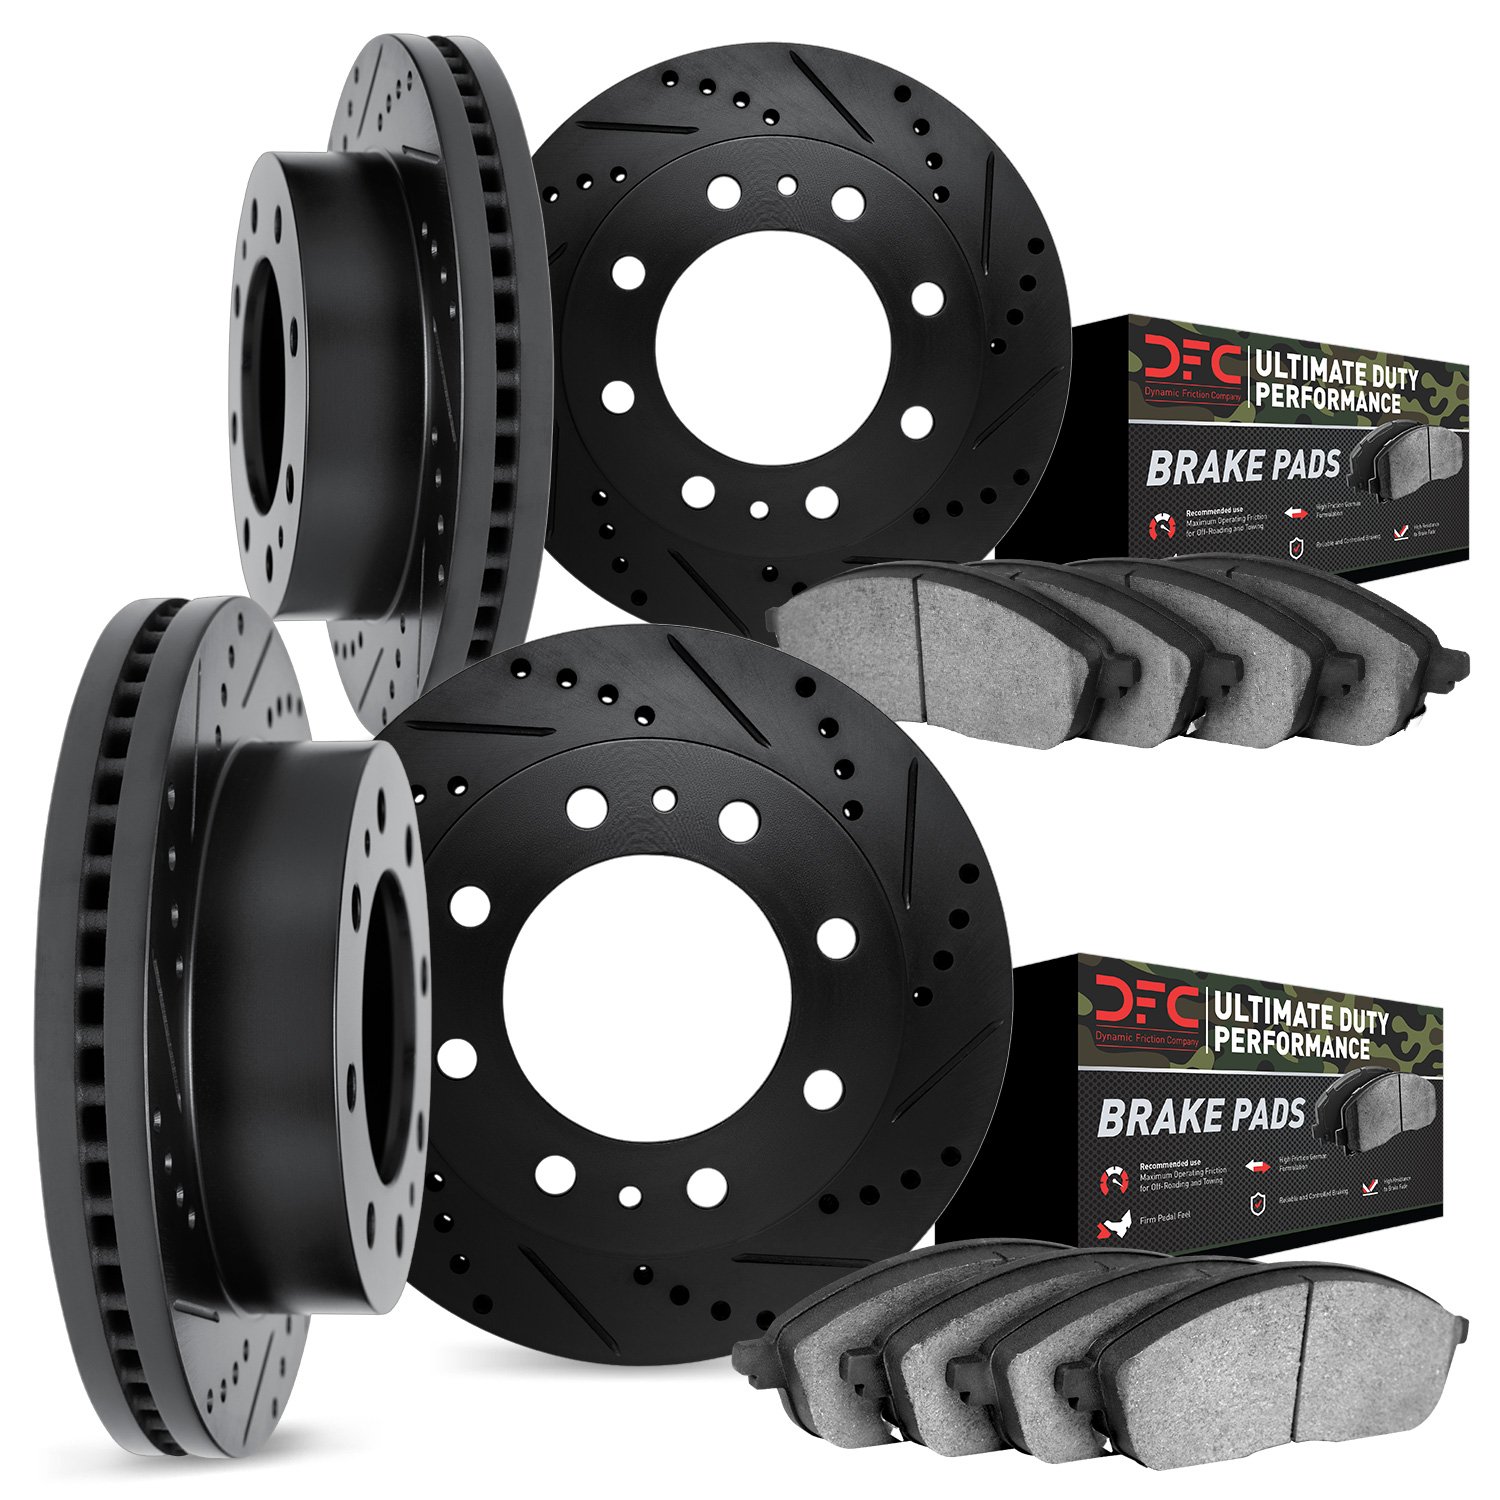 8404-48009 Drilled/Slotted Brake Rotors with Ultimate-Duty Brake Pads Kit [Black], 2005-2005 GM, Position: Front and Rear